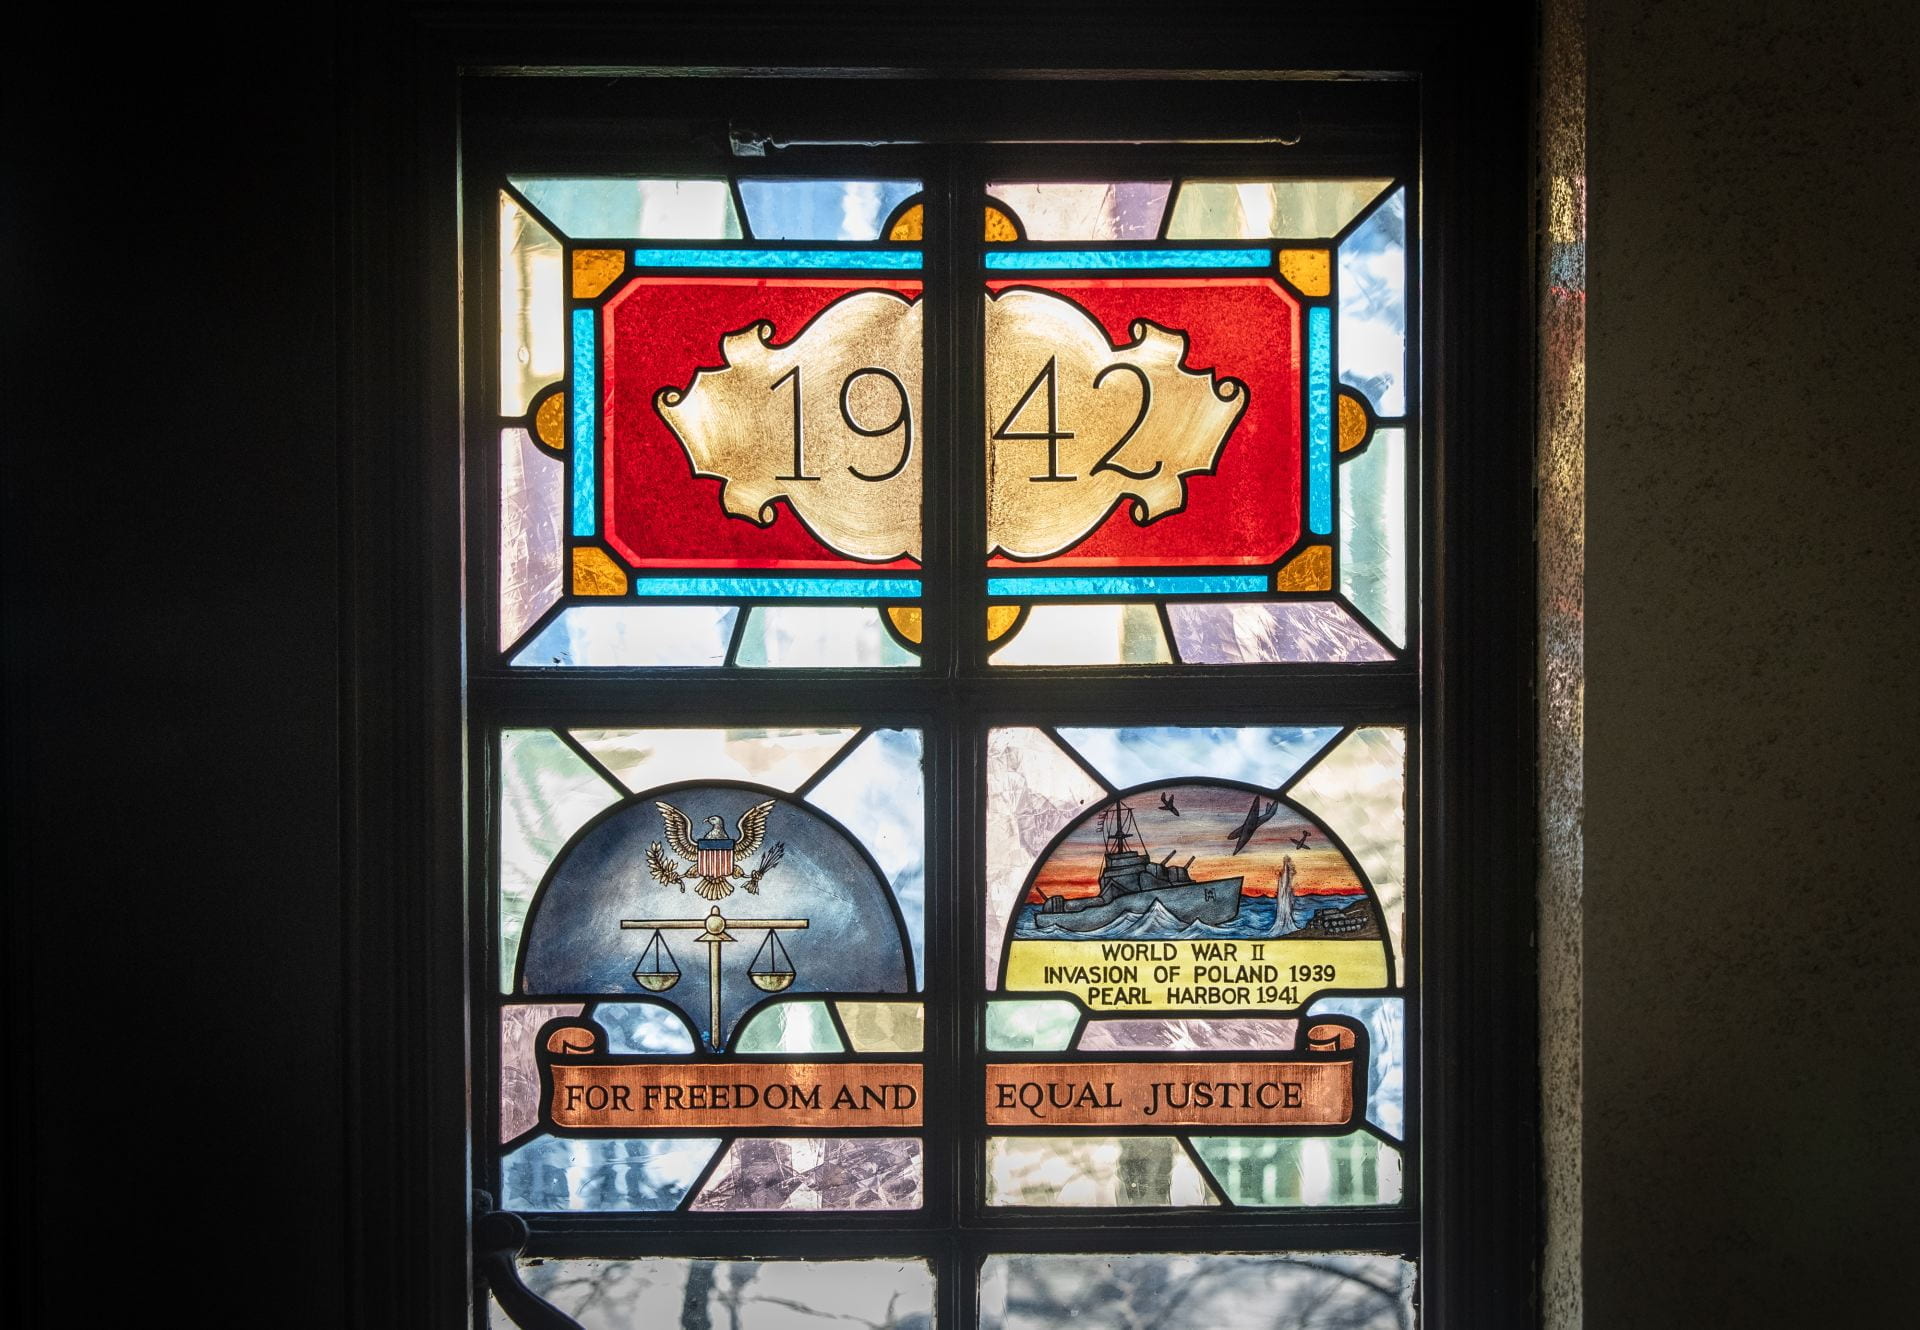 The 1942 stained glass includes the scales of justice side by side with a battleship and plane against a sunset or sunrise, and the text 